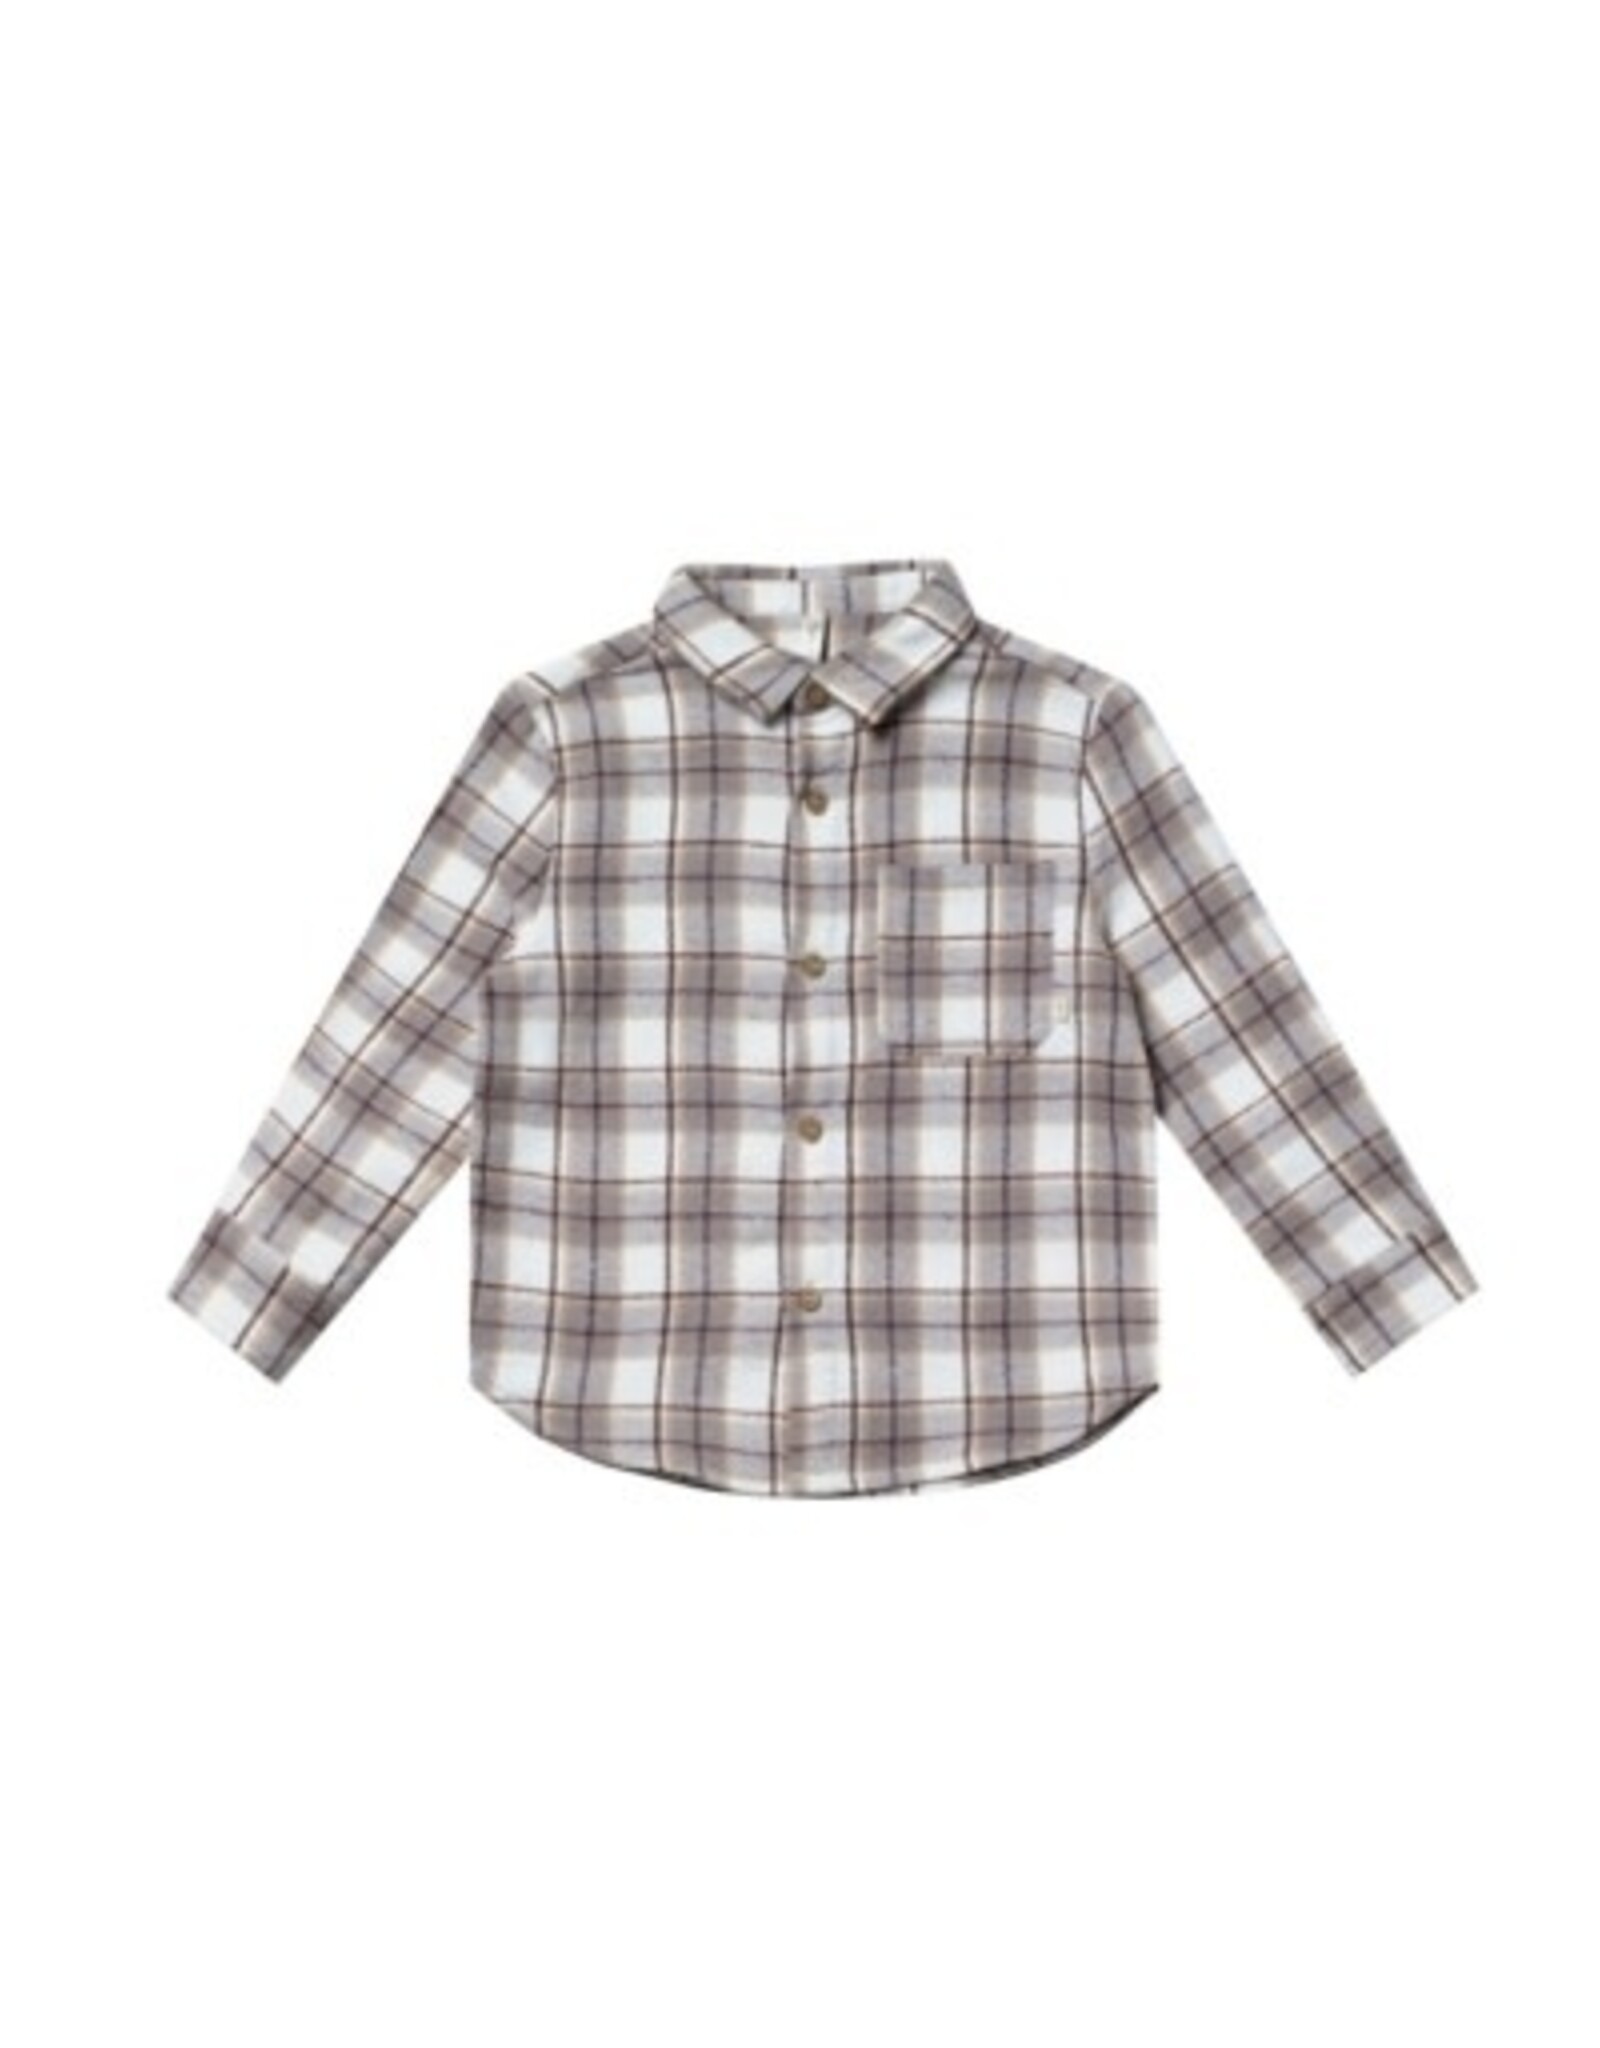 Rylee and Cru COLLARED LONG SLEEVE SHIRT || BLUE FLANNEL